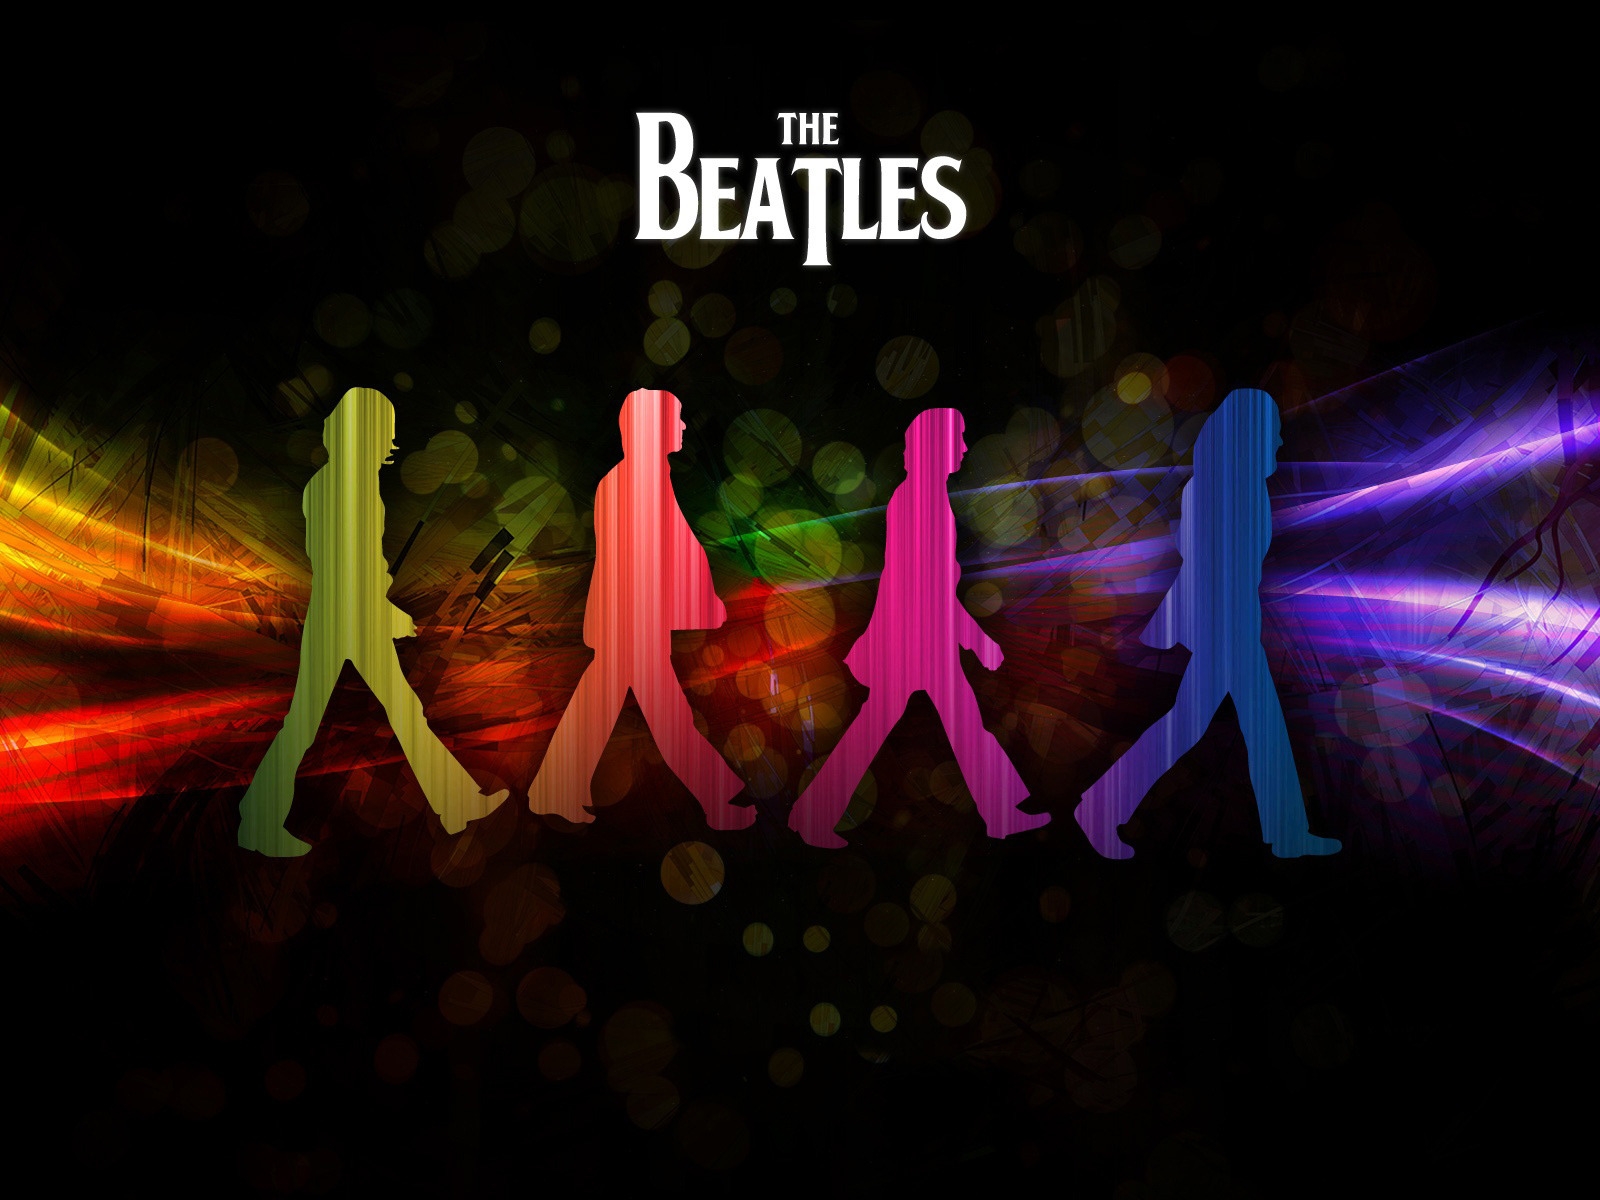 The Beatles Shadows for 1600 x 1200 resolution